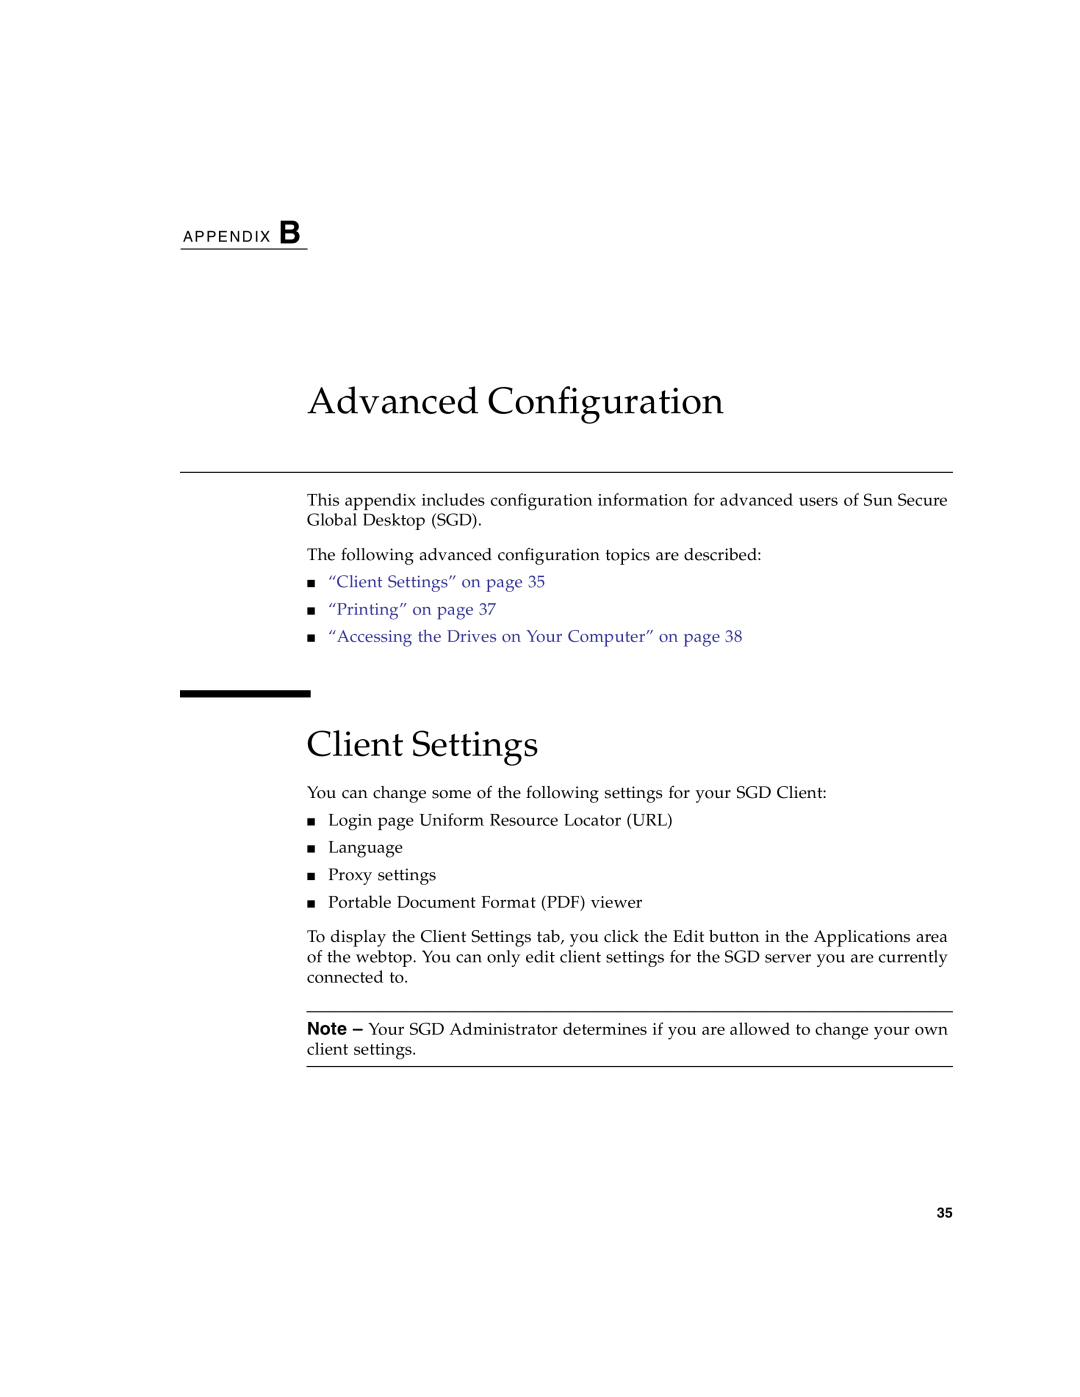 Sun Microsystems 4.5 manual Advanced Configuration, “Client Settings” on page “Printing” on page 